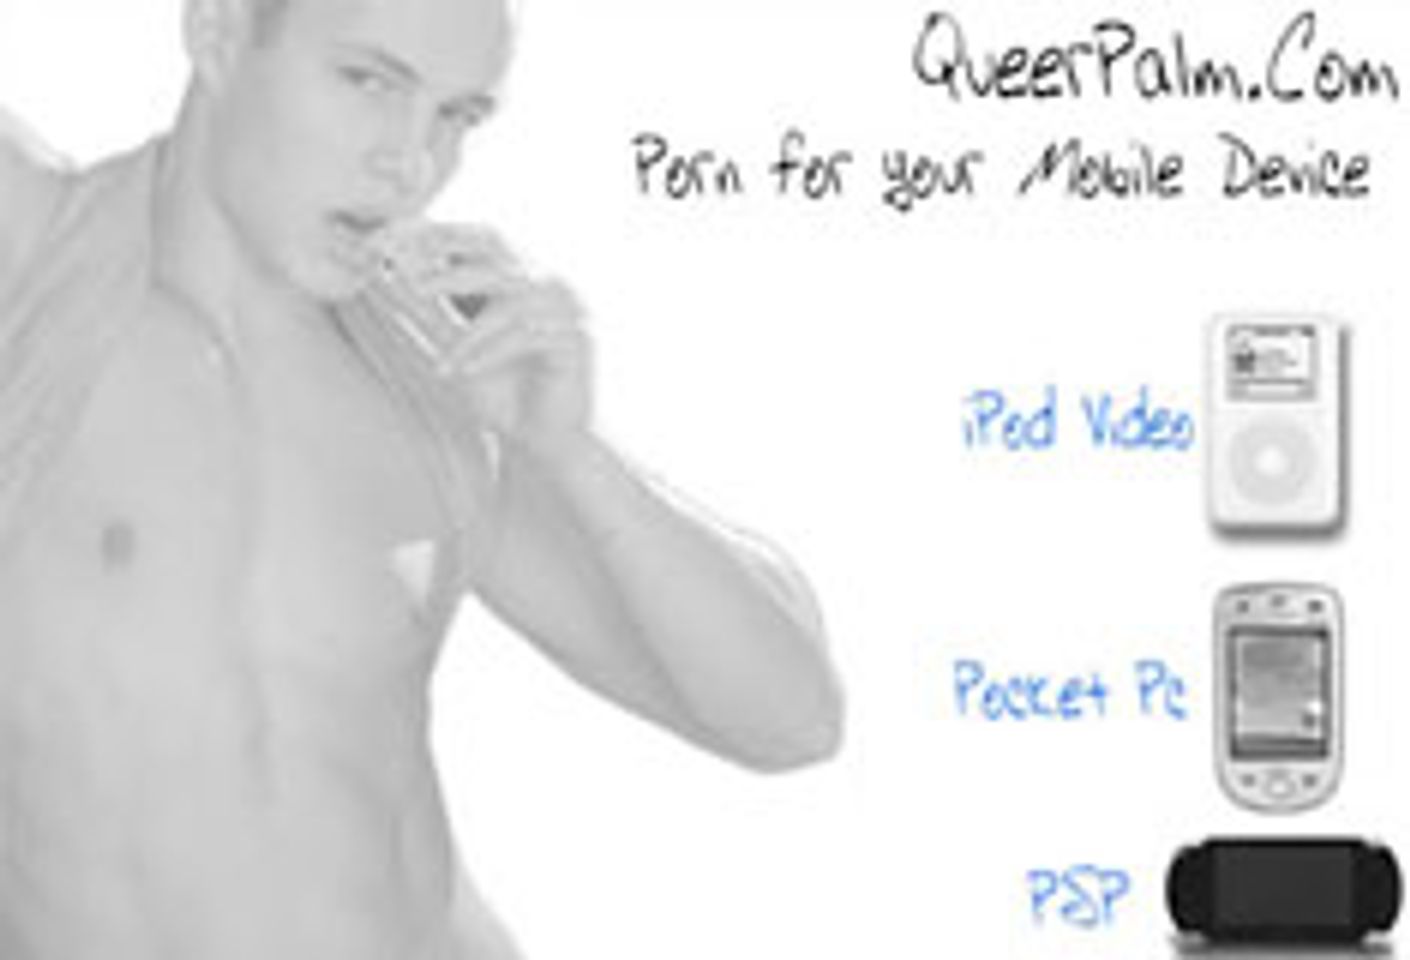 QueerPalm.com: Full-Length Videos for iPod, PSP, PocketPC